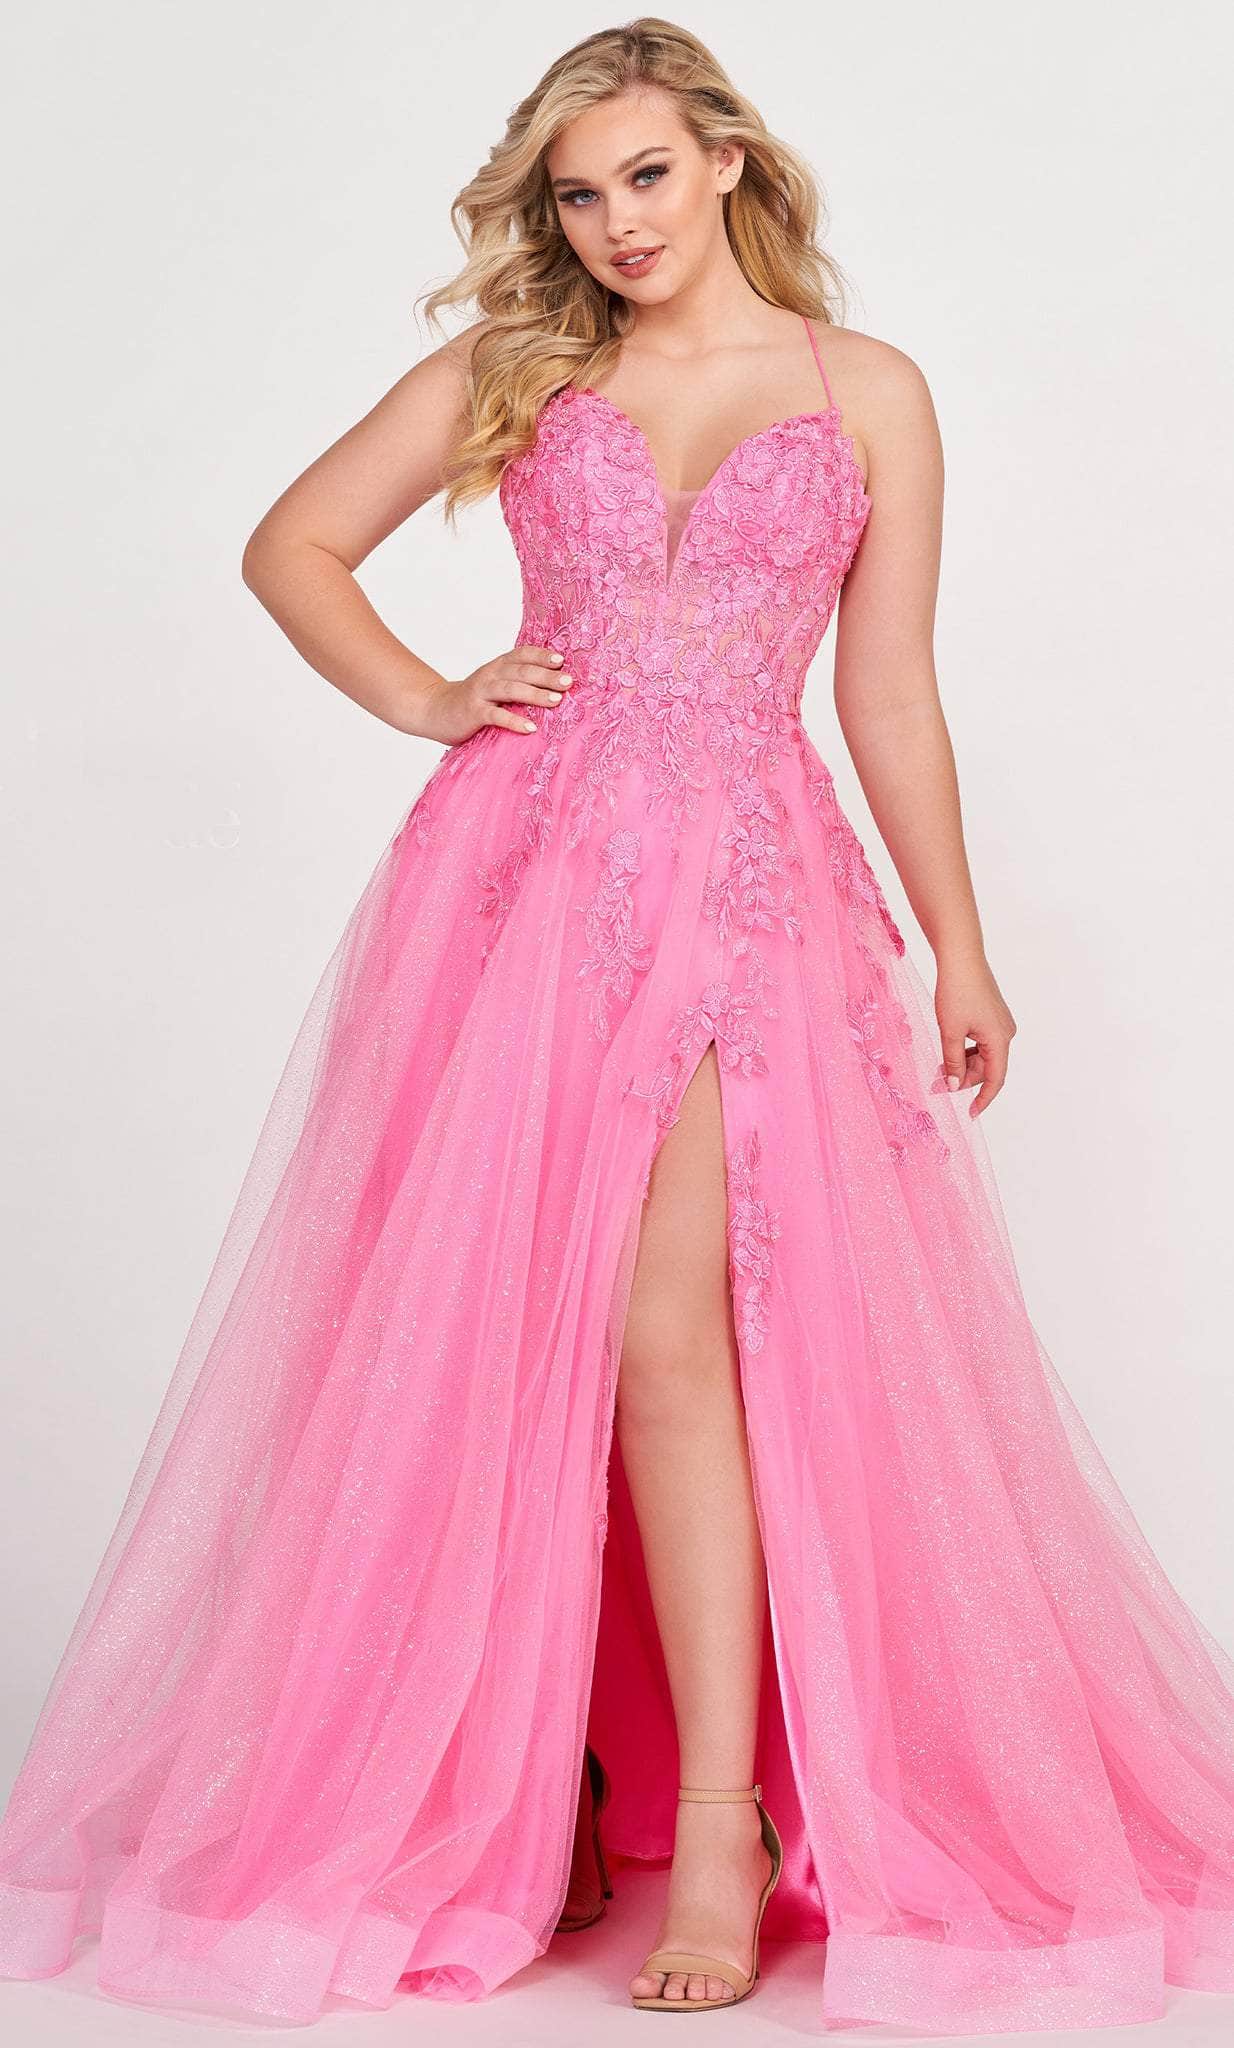 Image of Ellie Wilde EW34042 - Sweetheart Floral Lace Evening Gown